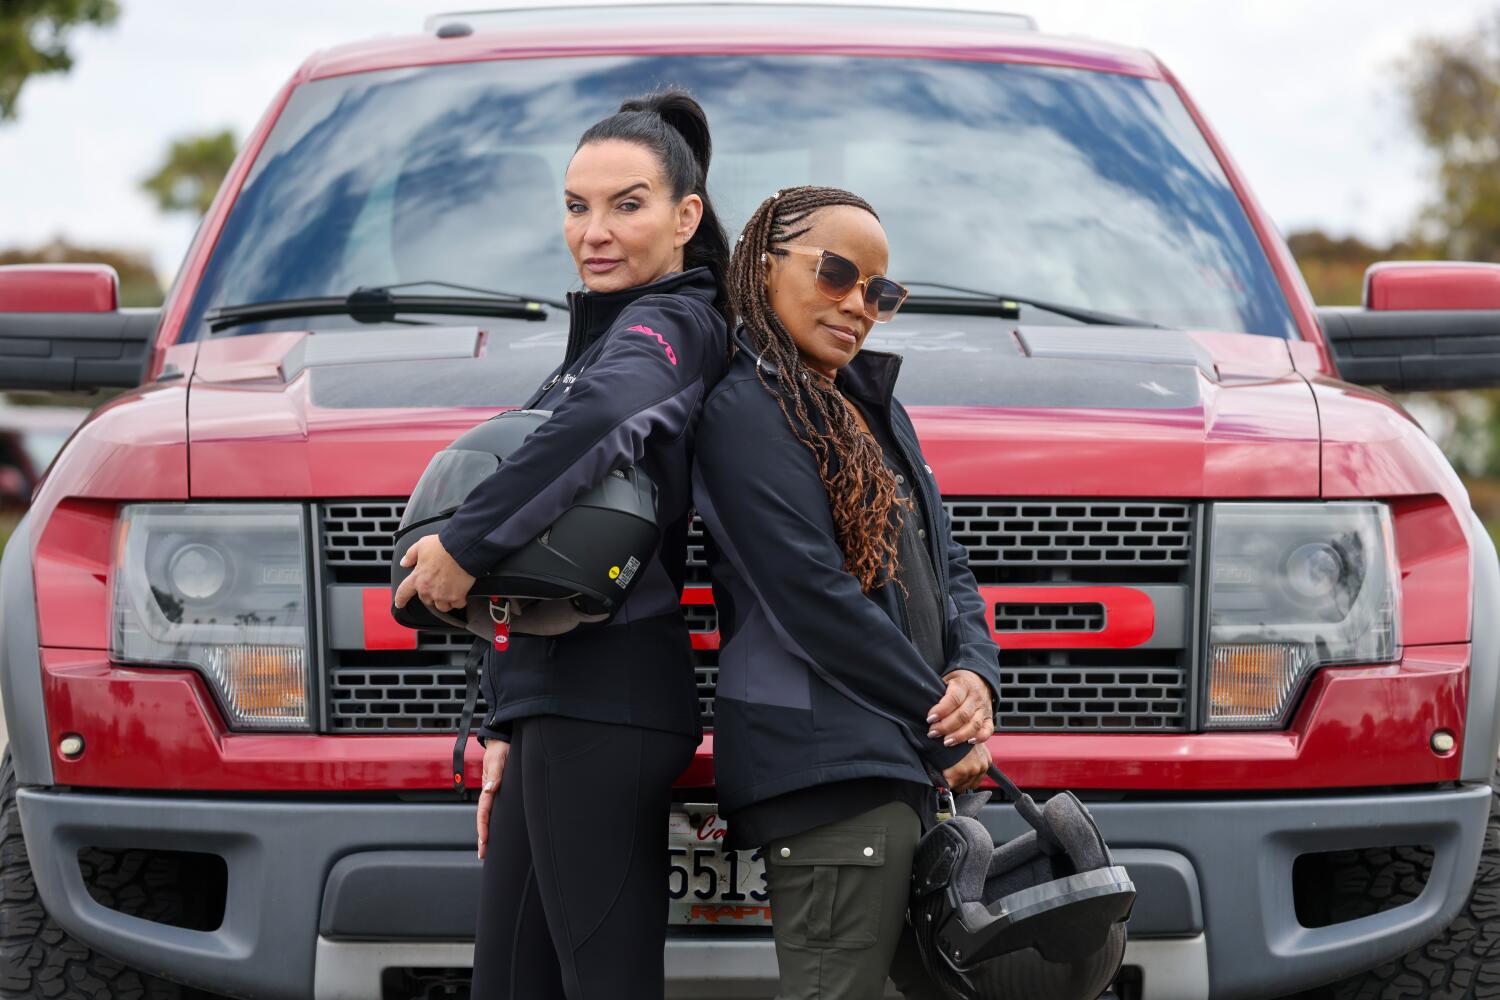 Hollywood's stunt-driving industry is dominated by men. These women are fighting for change